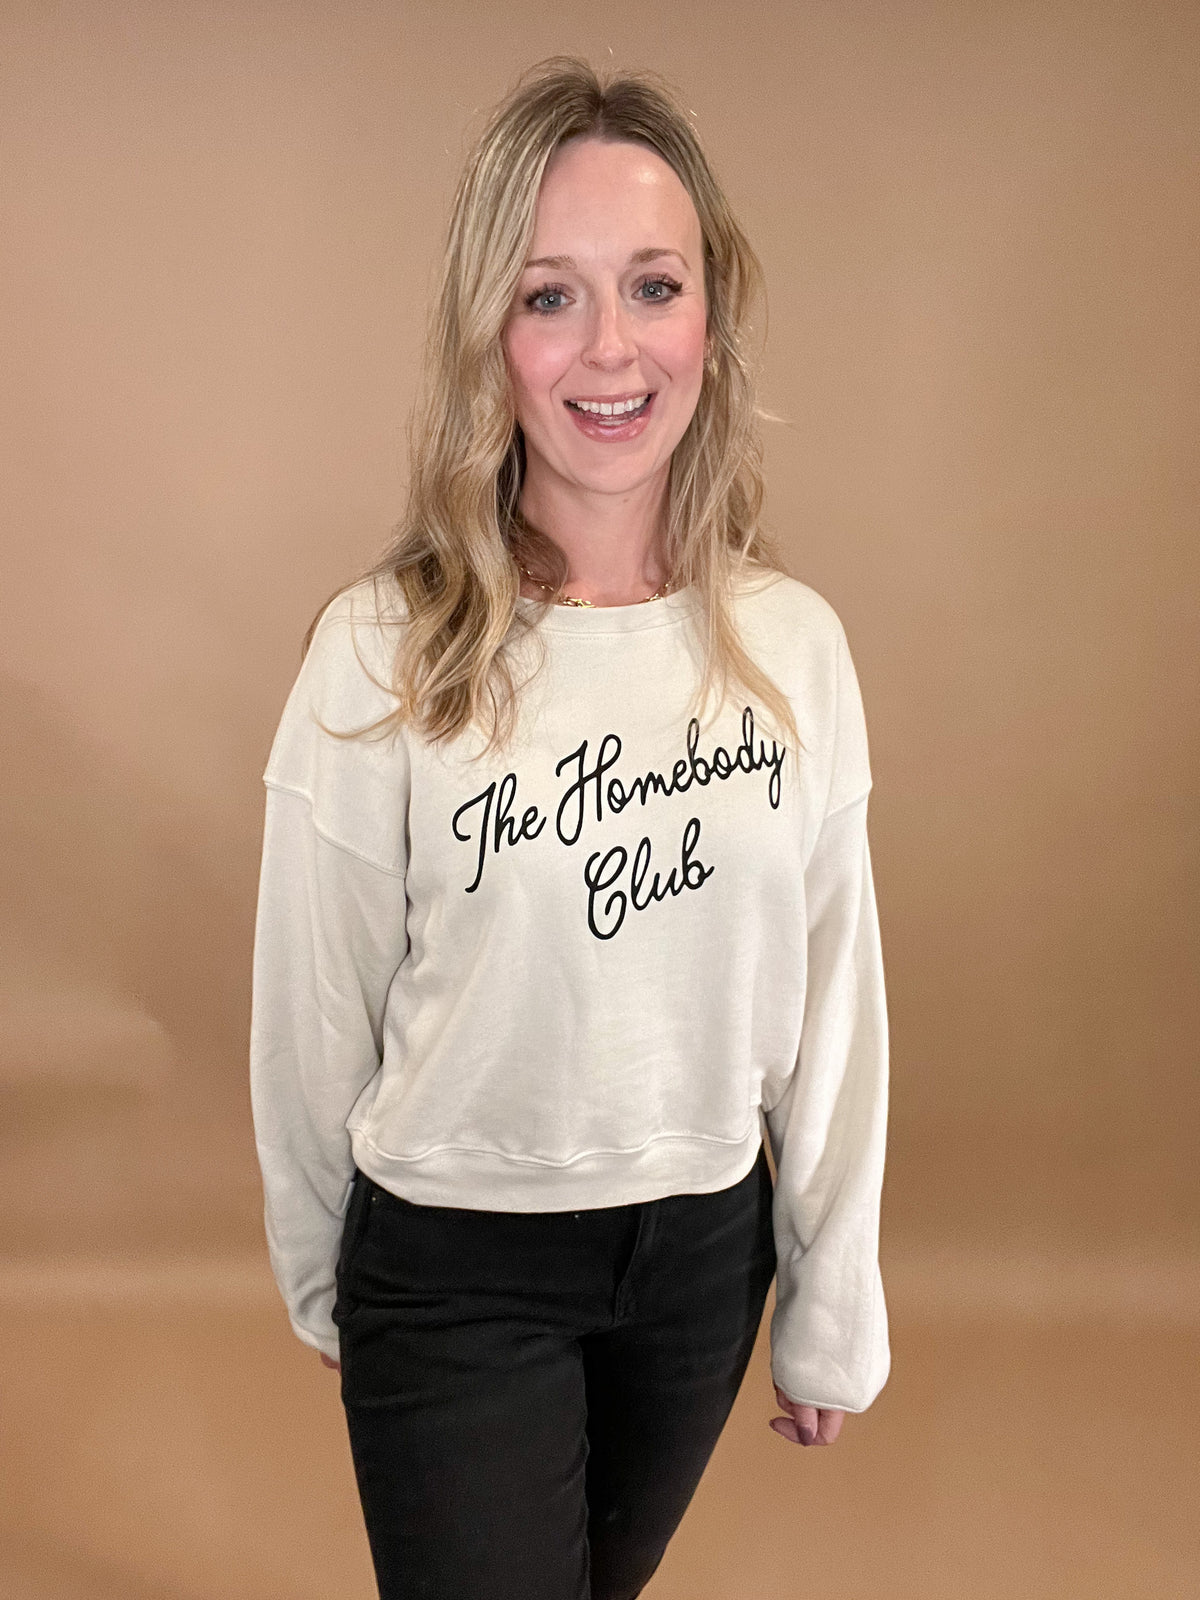 This Homebody Club Sweatshirt is a luxurious statement piece for those cozy days at home. Crafted from cozy cream fabric and black print, this sweatshirt is perfect for you or for a special someone. Wearing it will remind you that it's always homebody season.